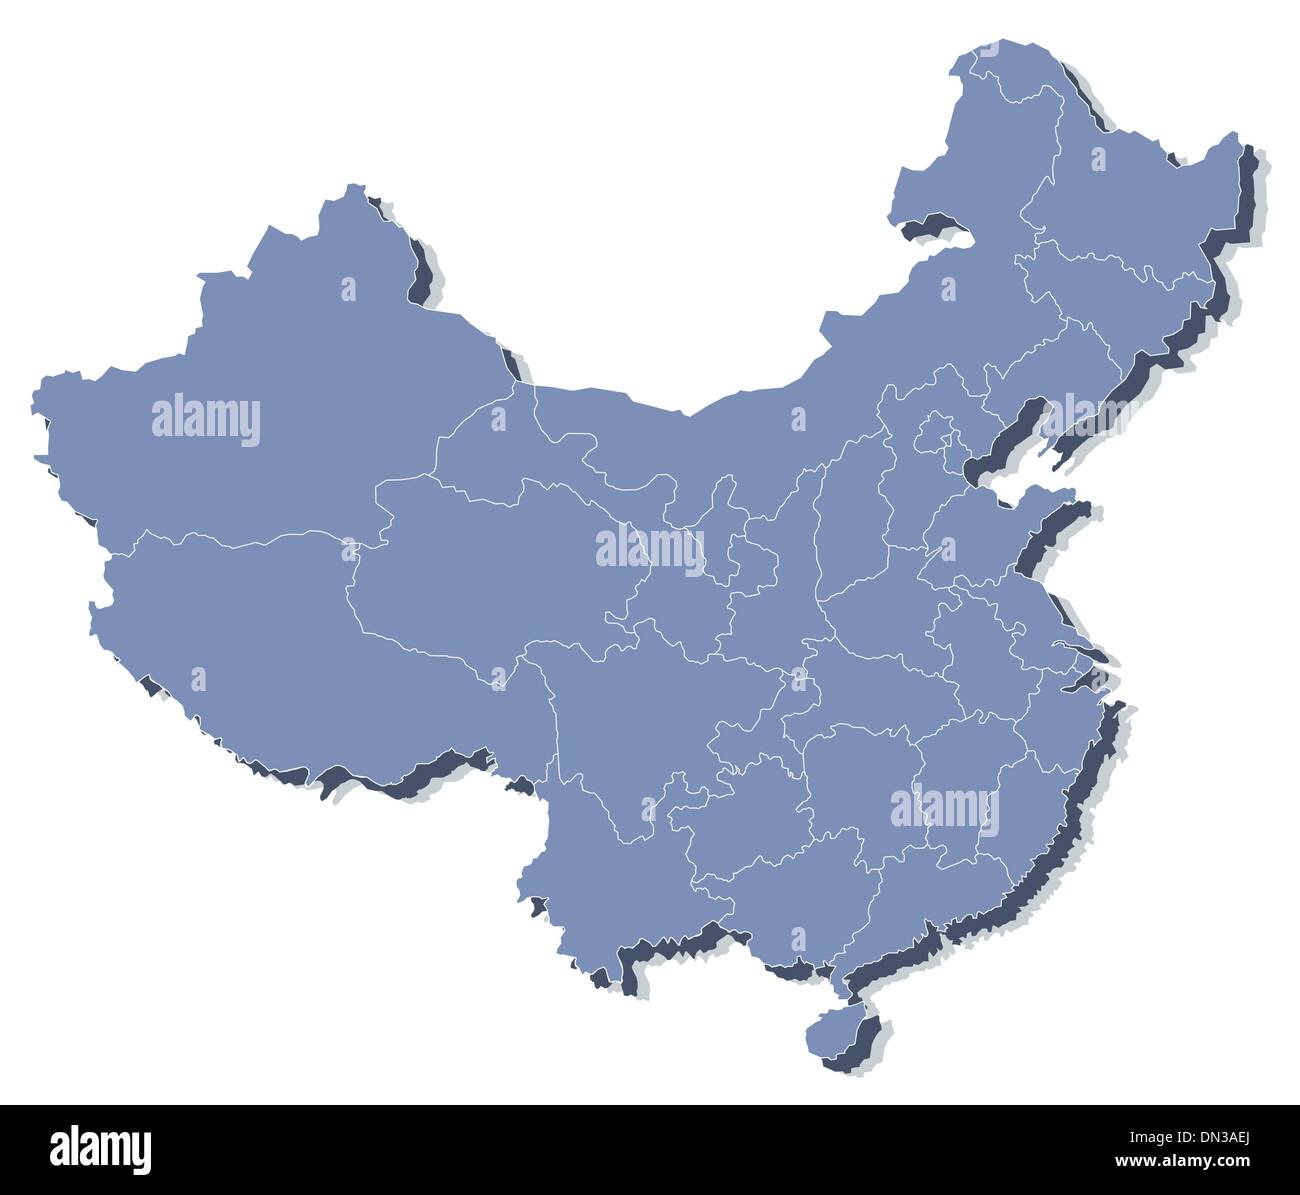 vector map of People's Republic of China (PRC) Stock Vector